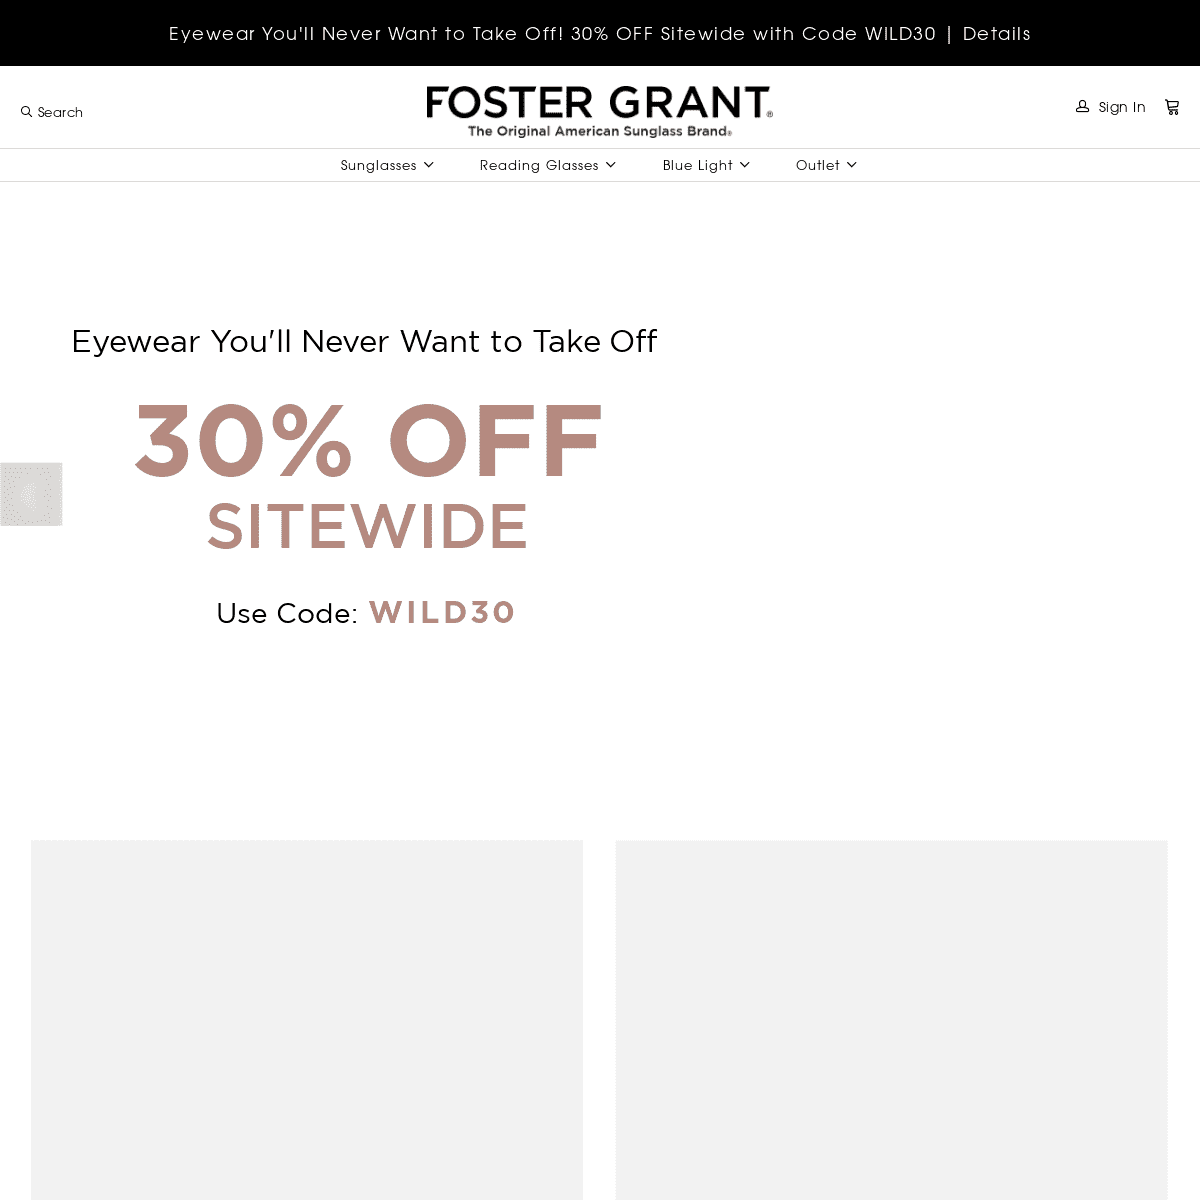 A complete backup of https://fostergrant.com